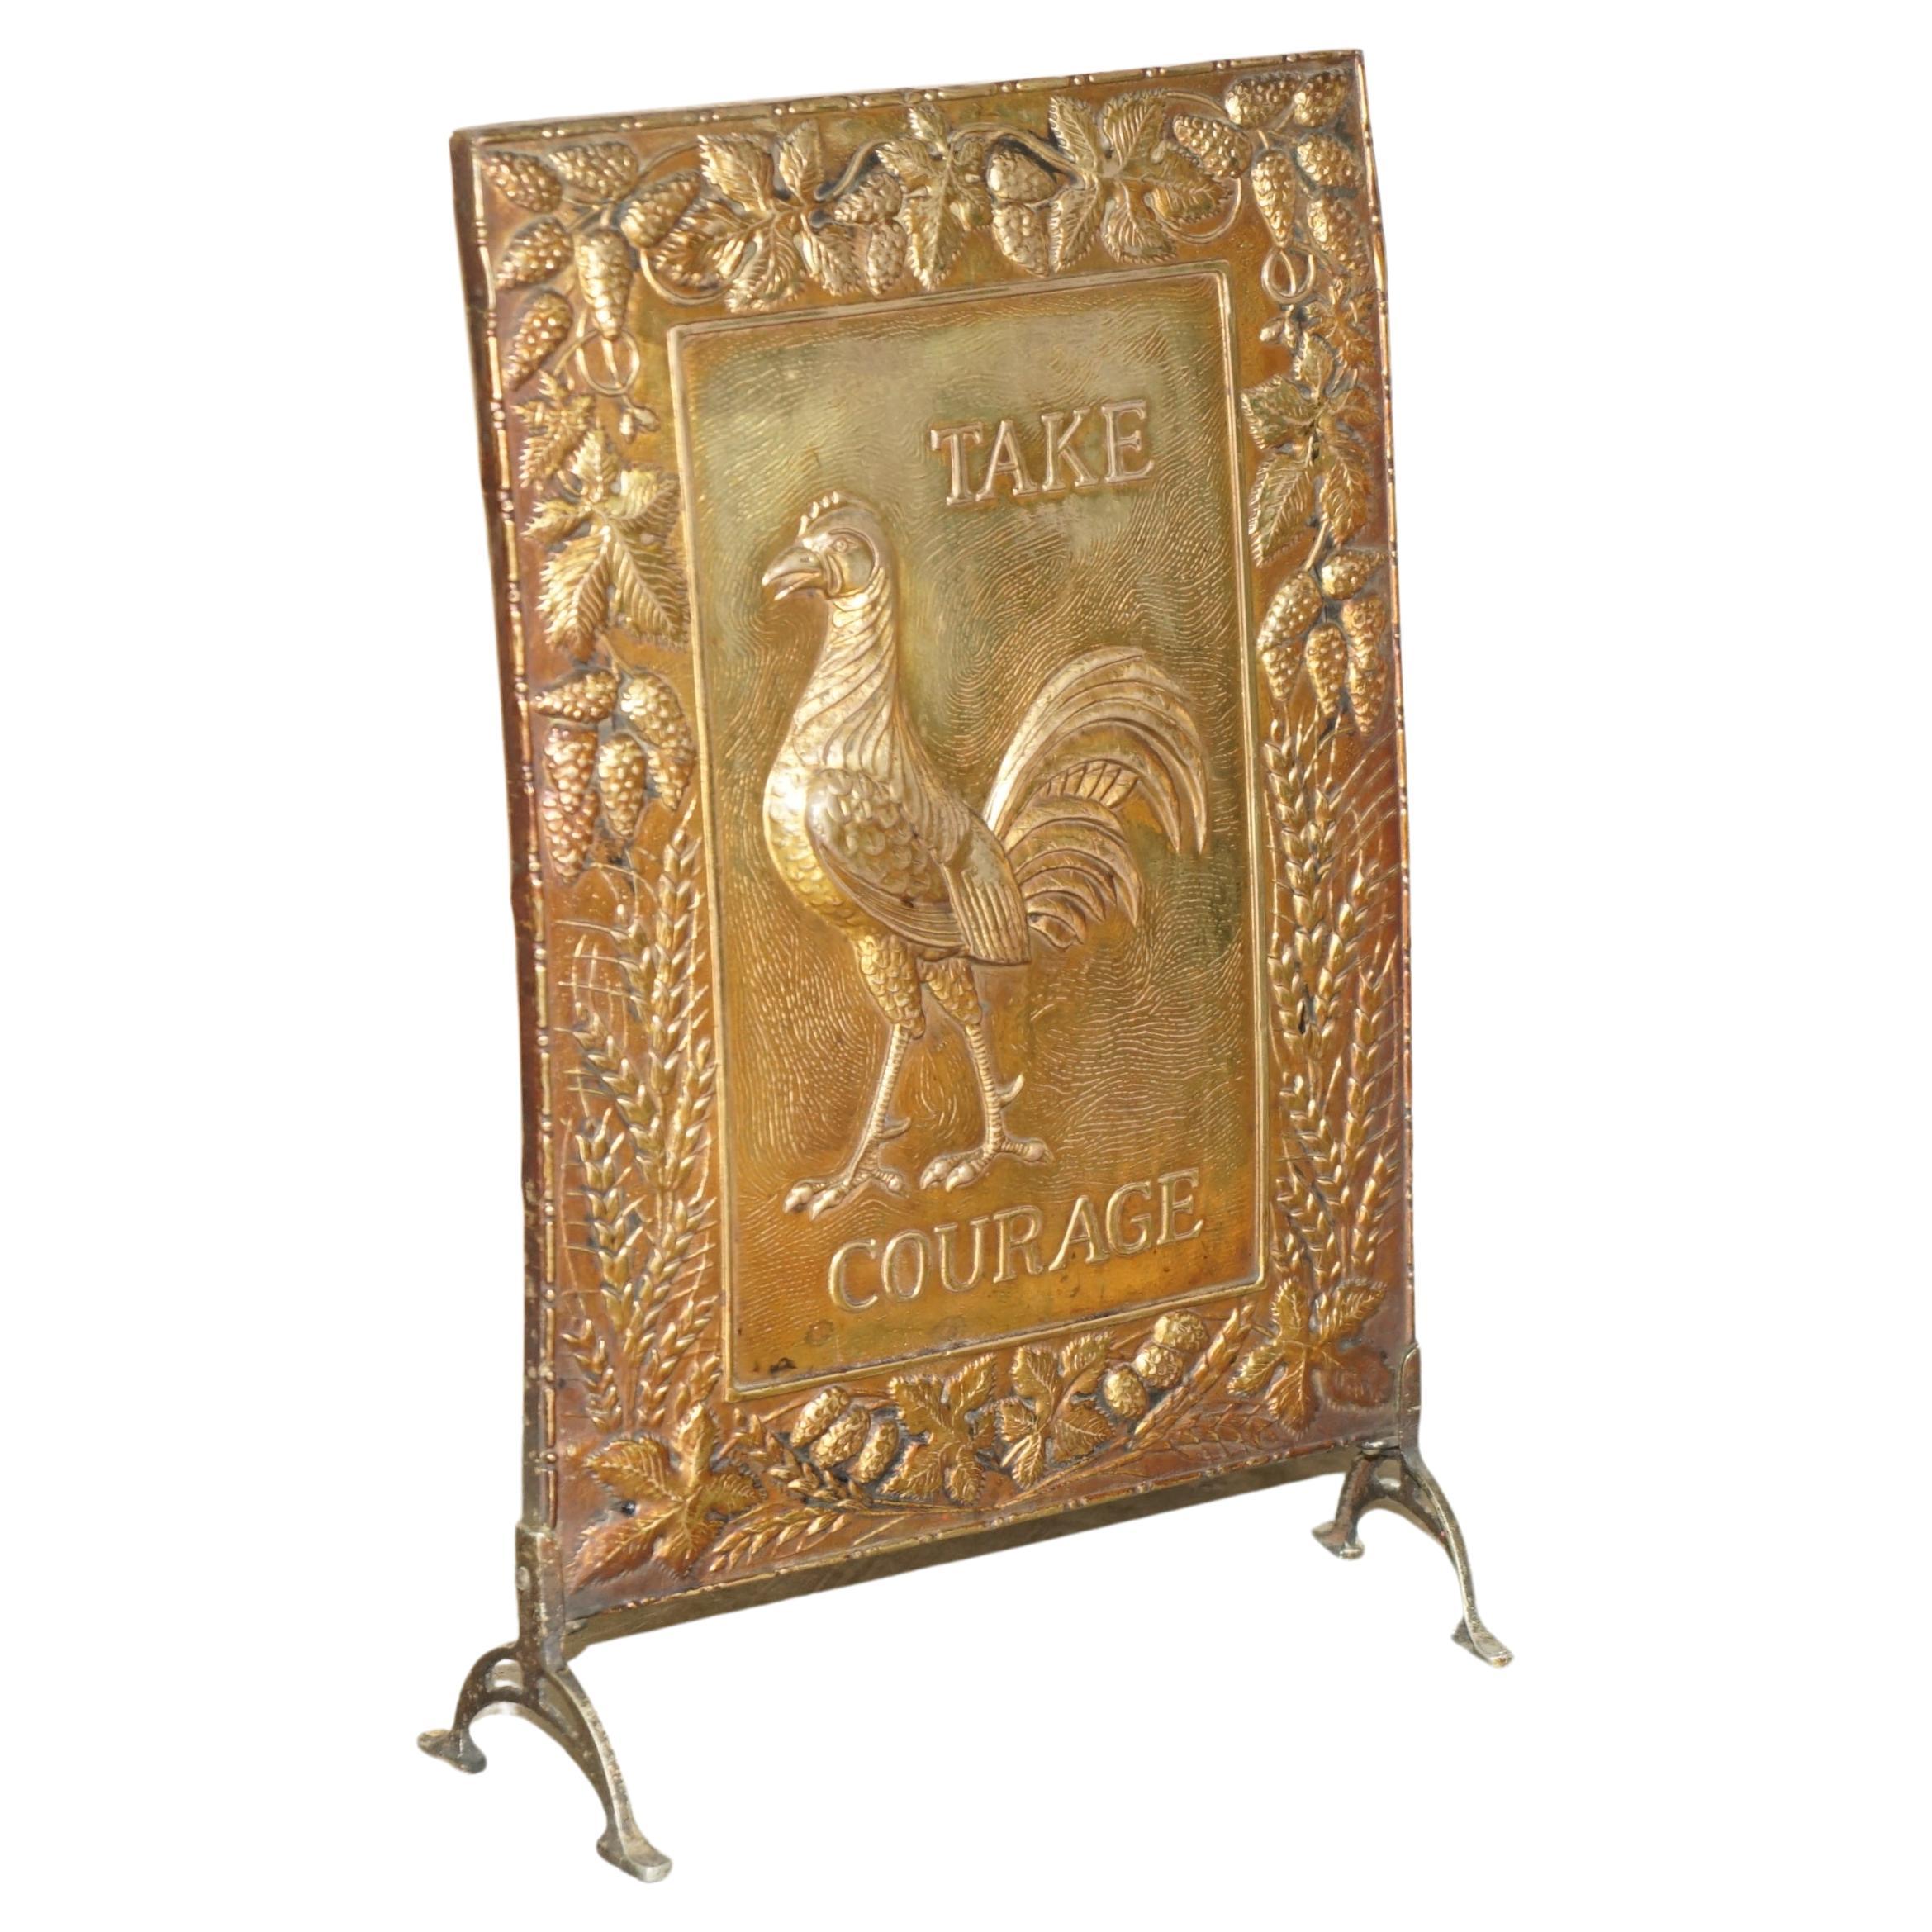 Royal House Antiques

Royal House Antiques is delighted to offer for sale this stunning circa 1890-1900 “Take Courage” Ale, pressed brass fire screen guard

A very good looking and well made piece, the main body is a piece of breweriana which is